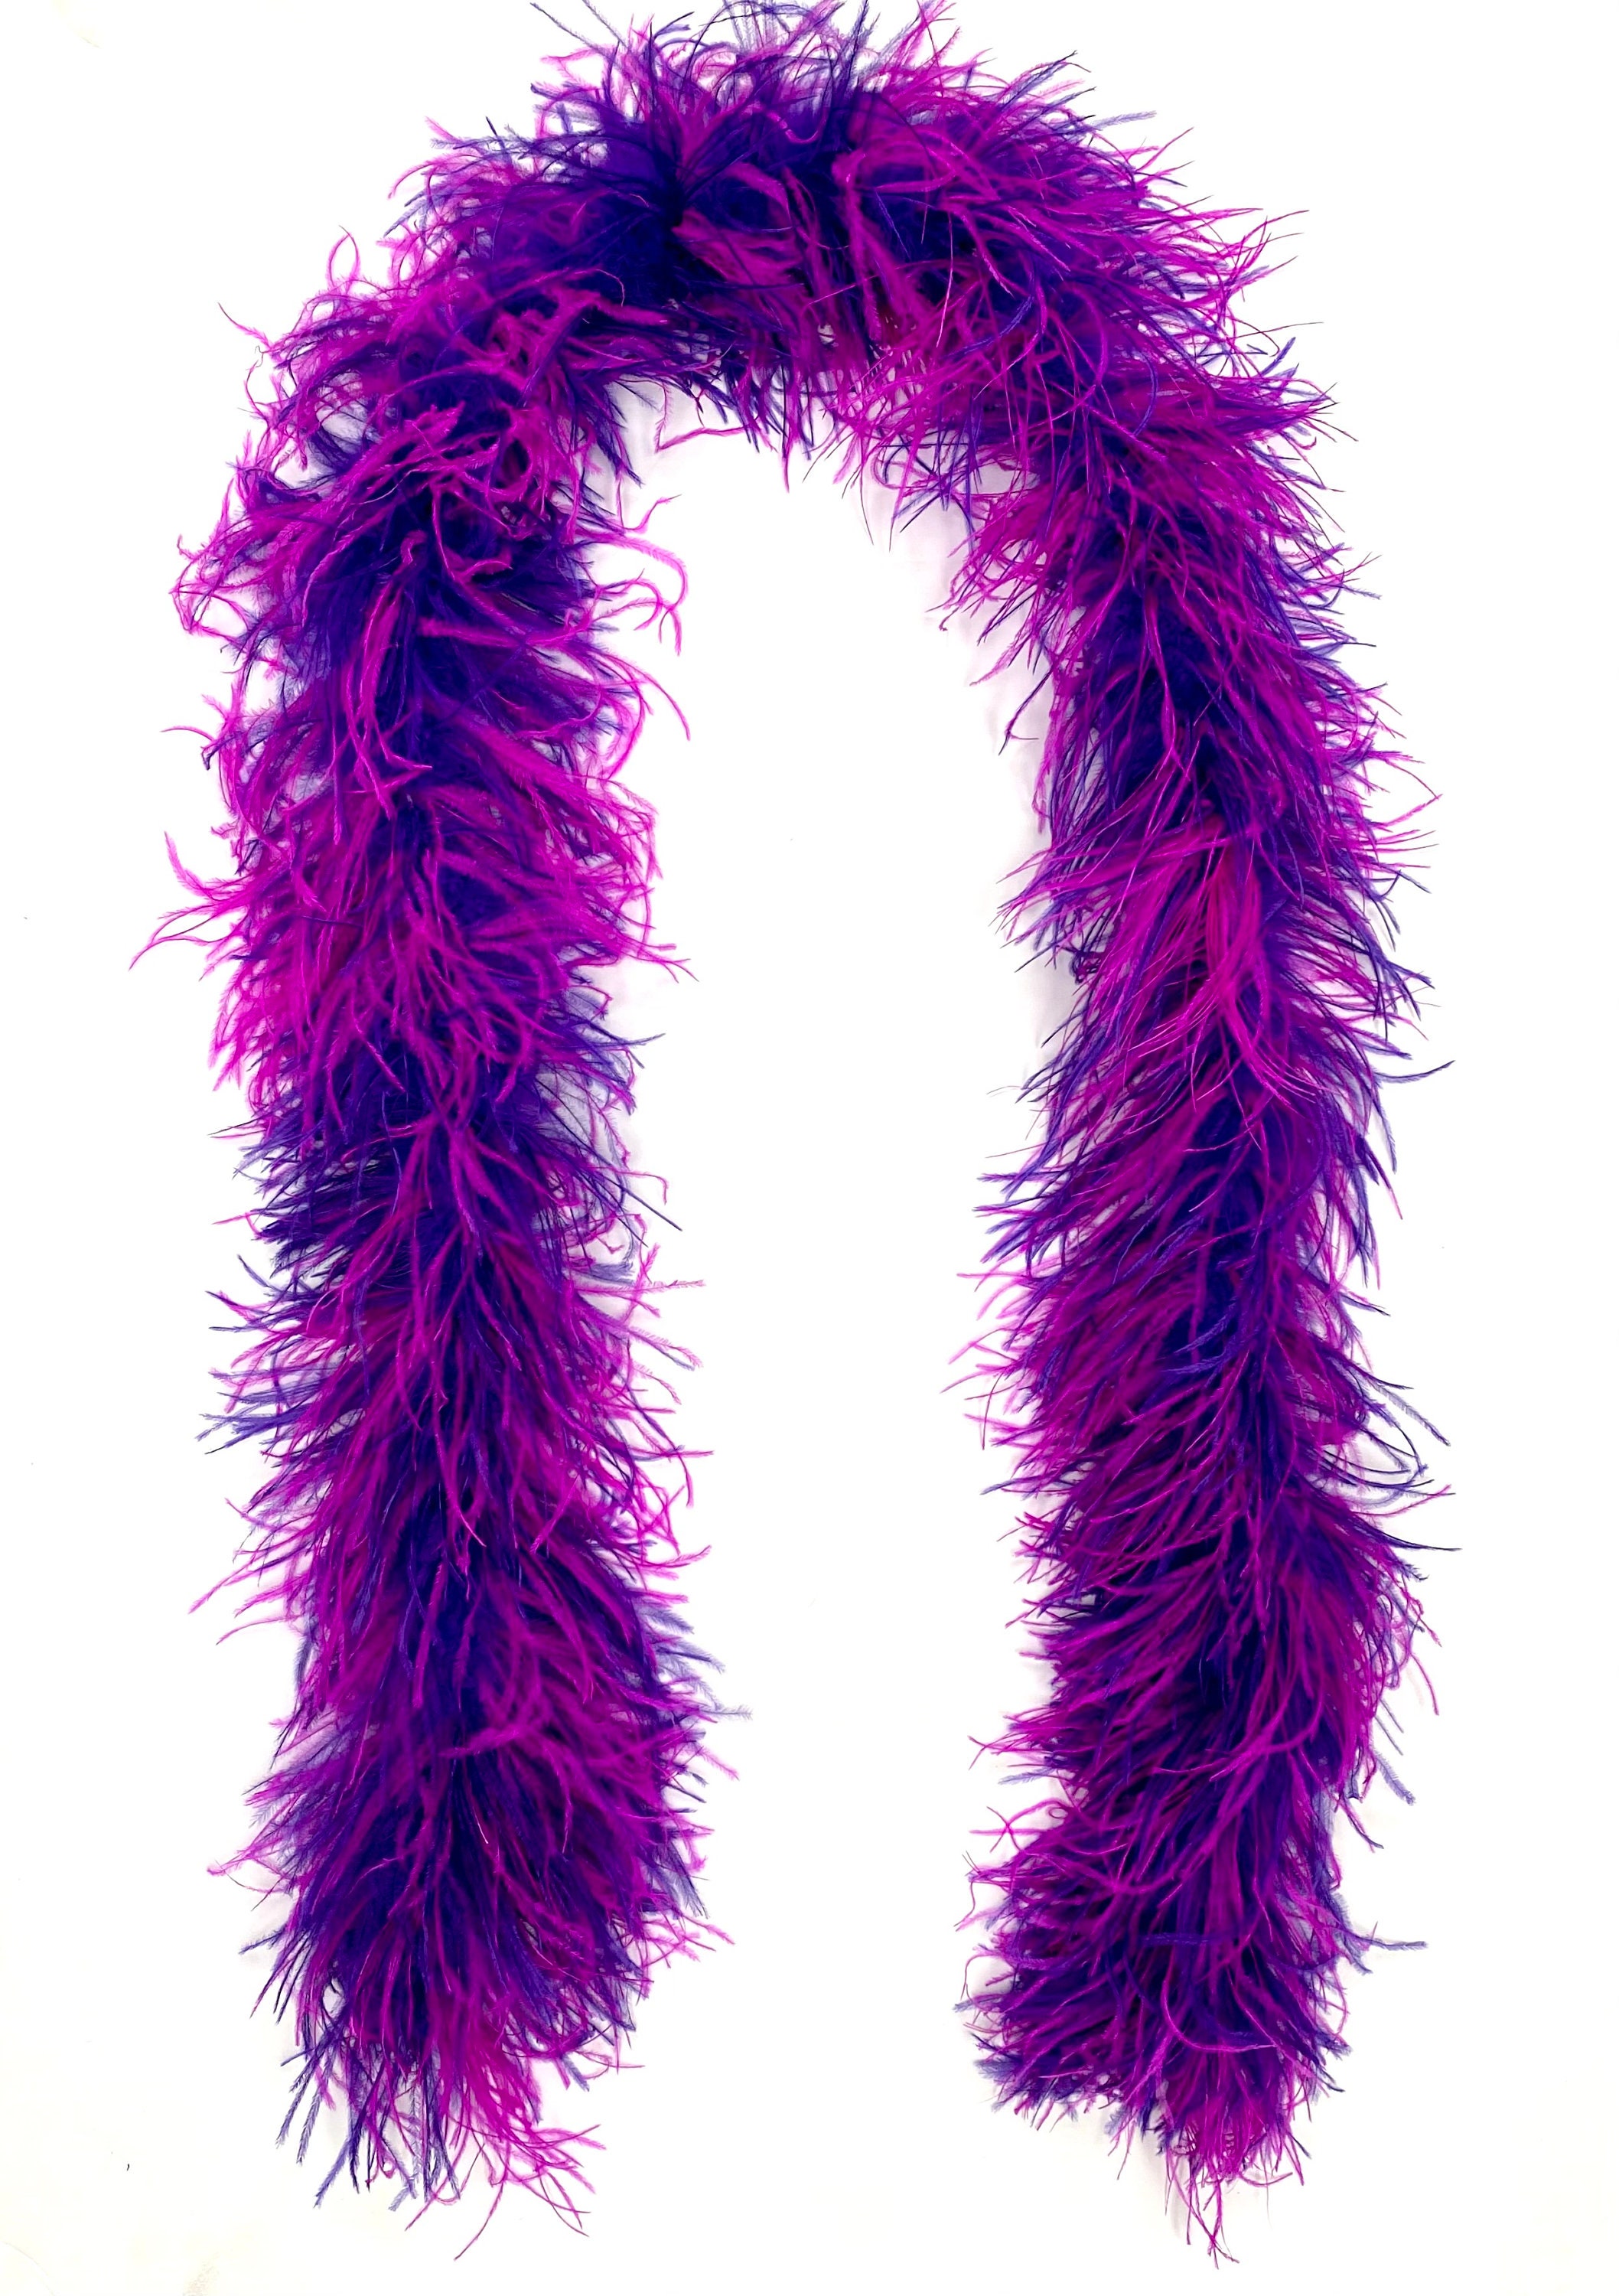 EUBUY 2 Meters Natural Ostrich Feather Boa Fluffy Costumes Accessories Trim  Shawl Plume Scarf for Party Wedding Decorations Purple 